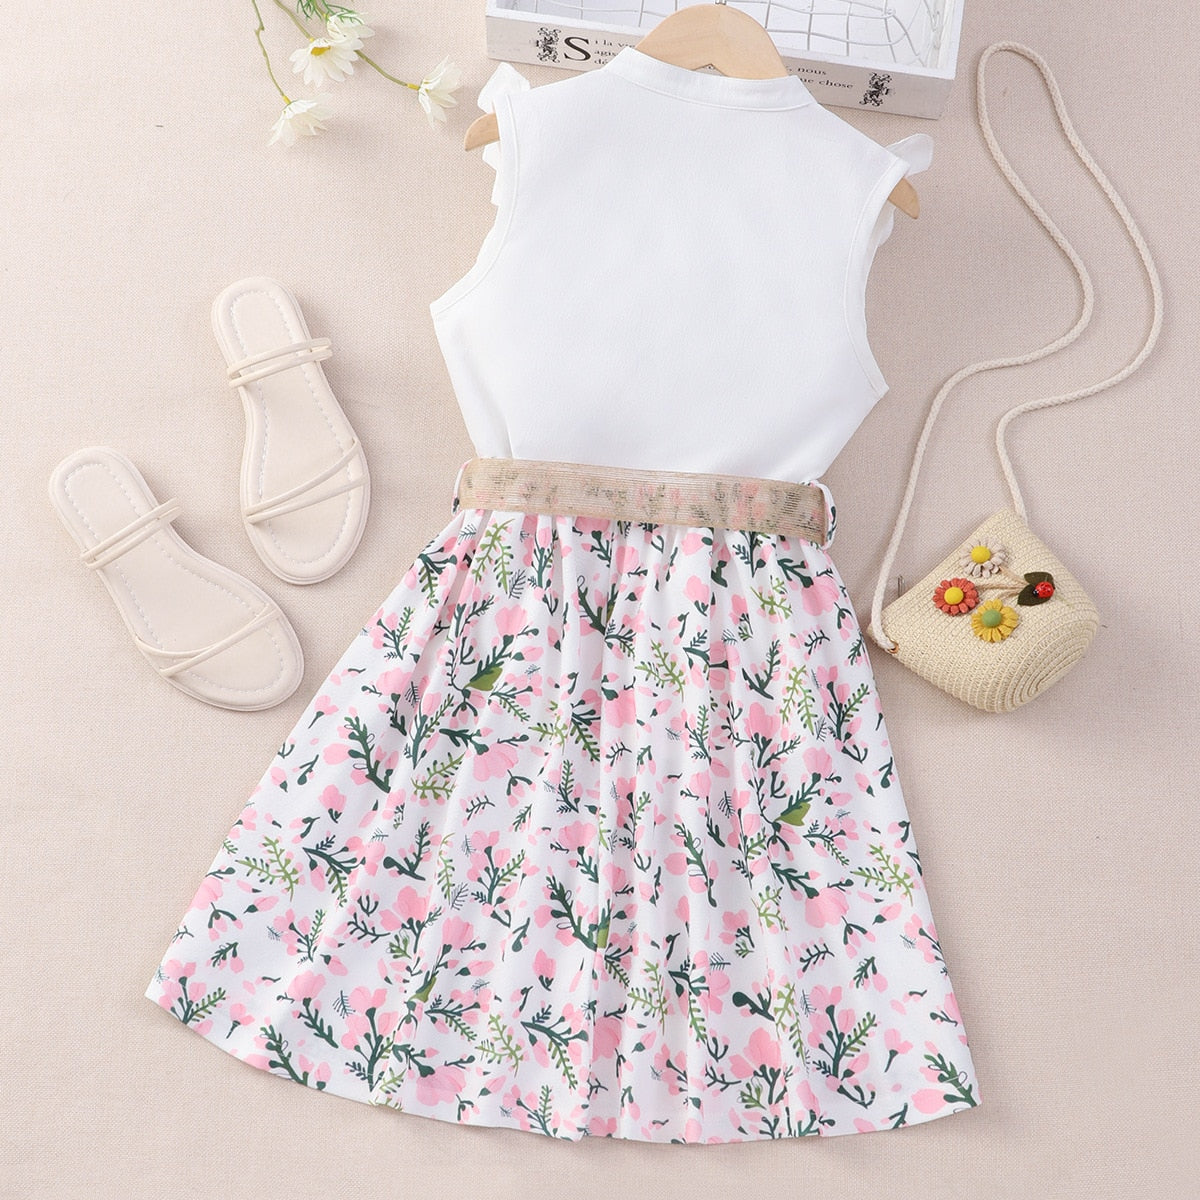 Summer Girl Clothing Sets Embroidered Lace Sleeveless Shirt Top + Floral Skirt 2Pcs Toddler Teenager Outfits